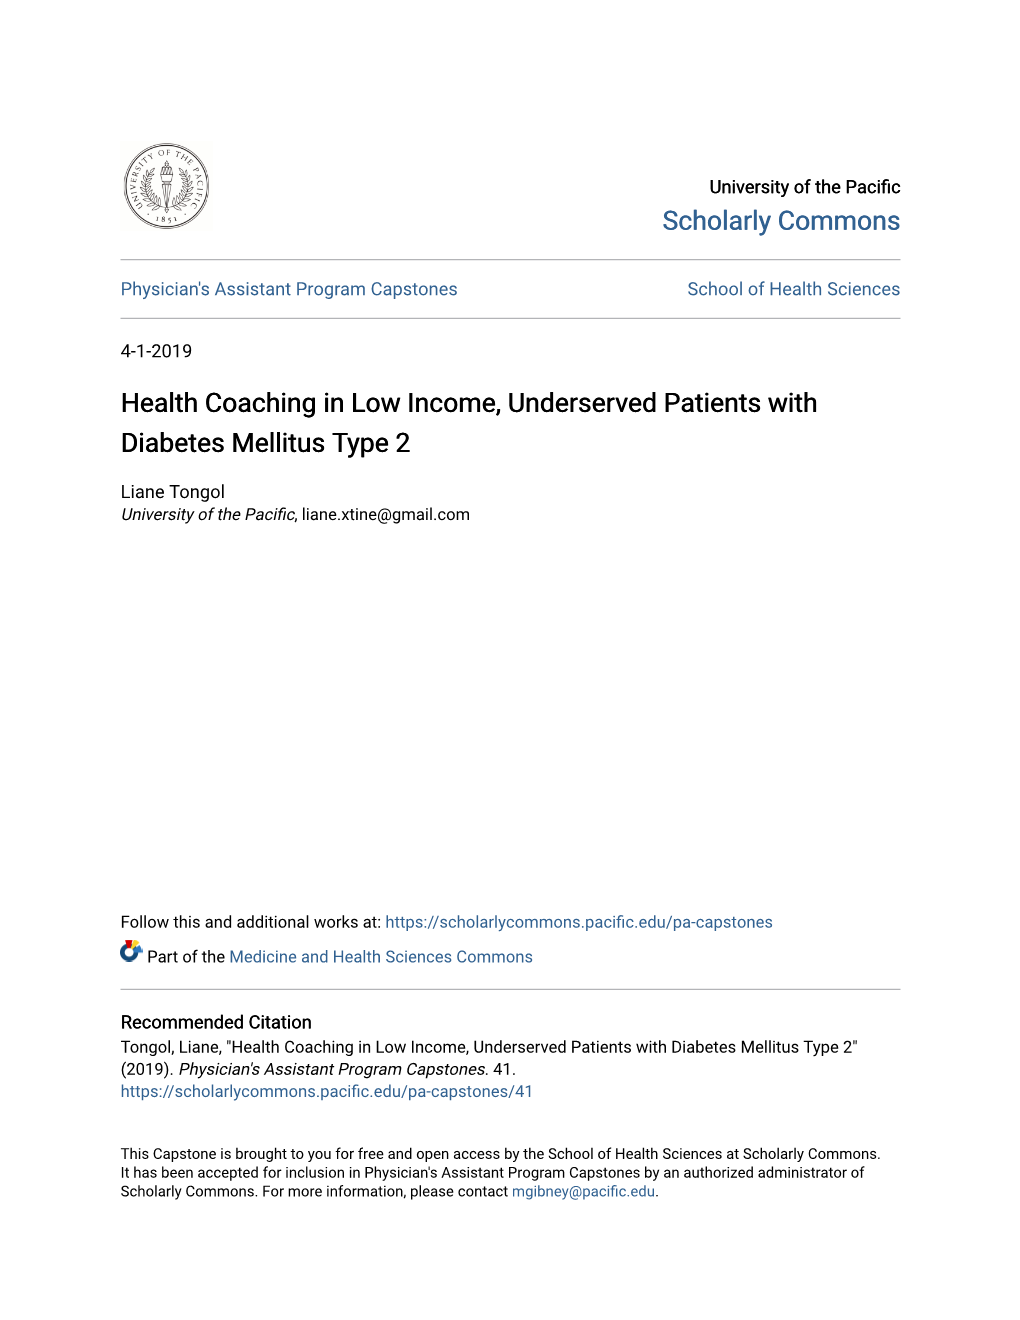 Health Coaching in Low Income, Underserved Patients with Diabetes Mellitus Type 2